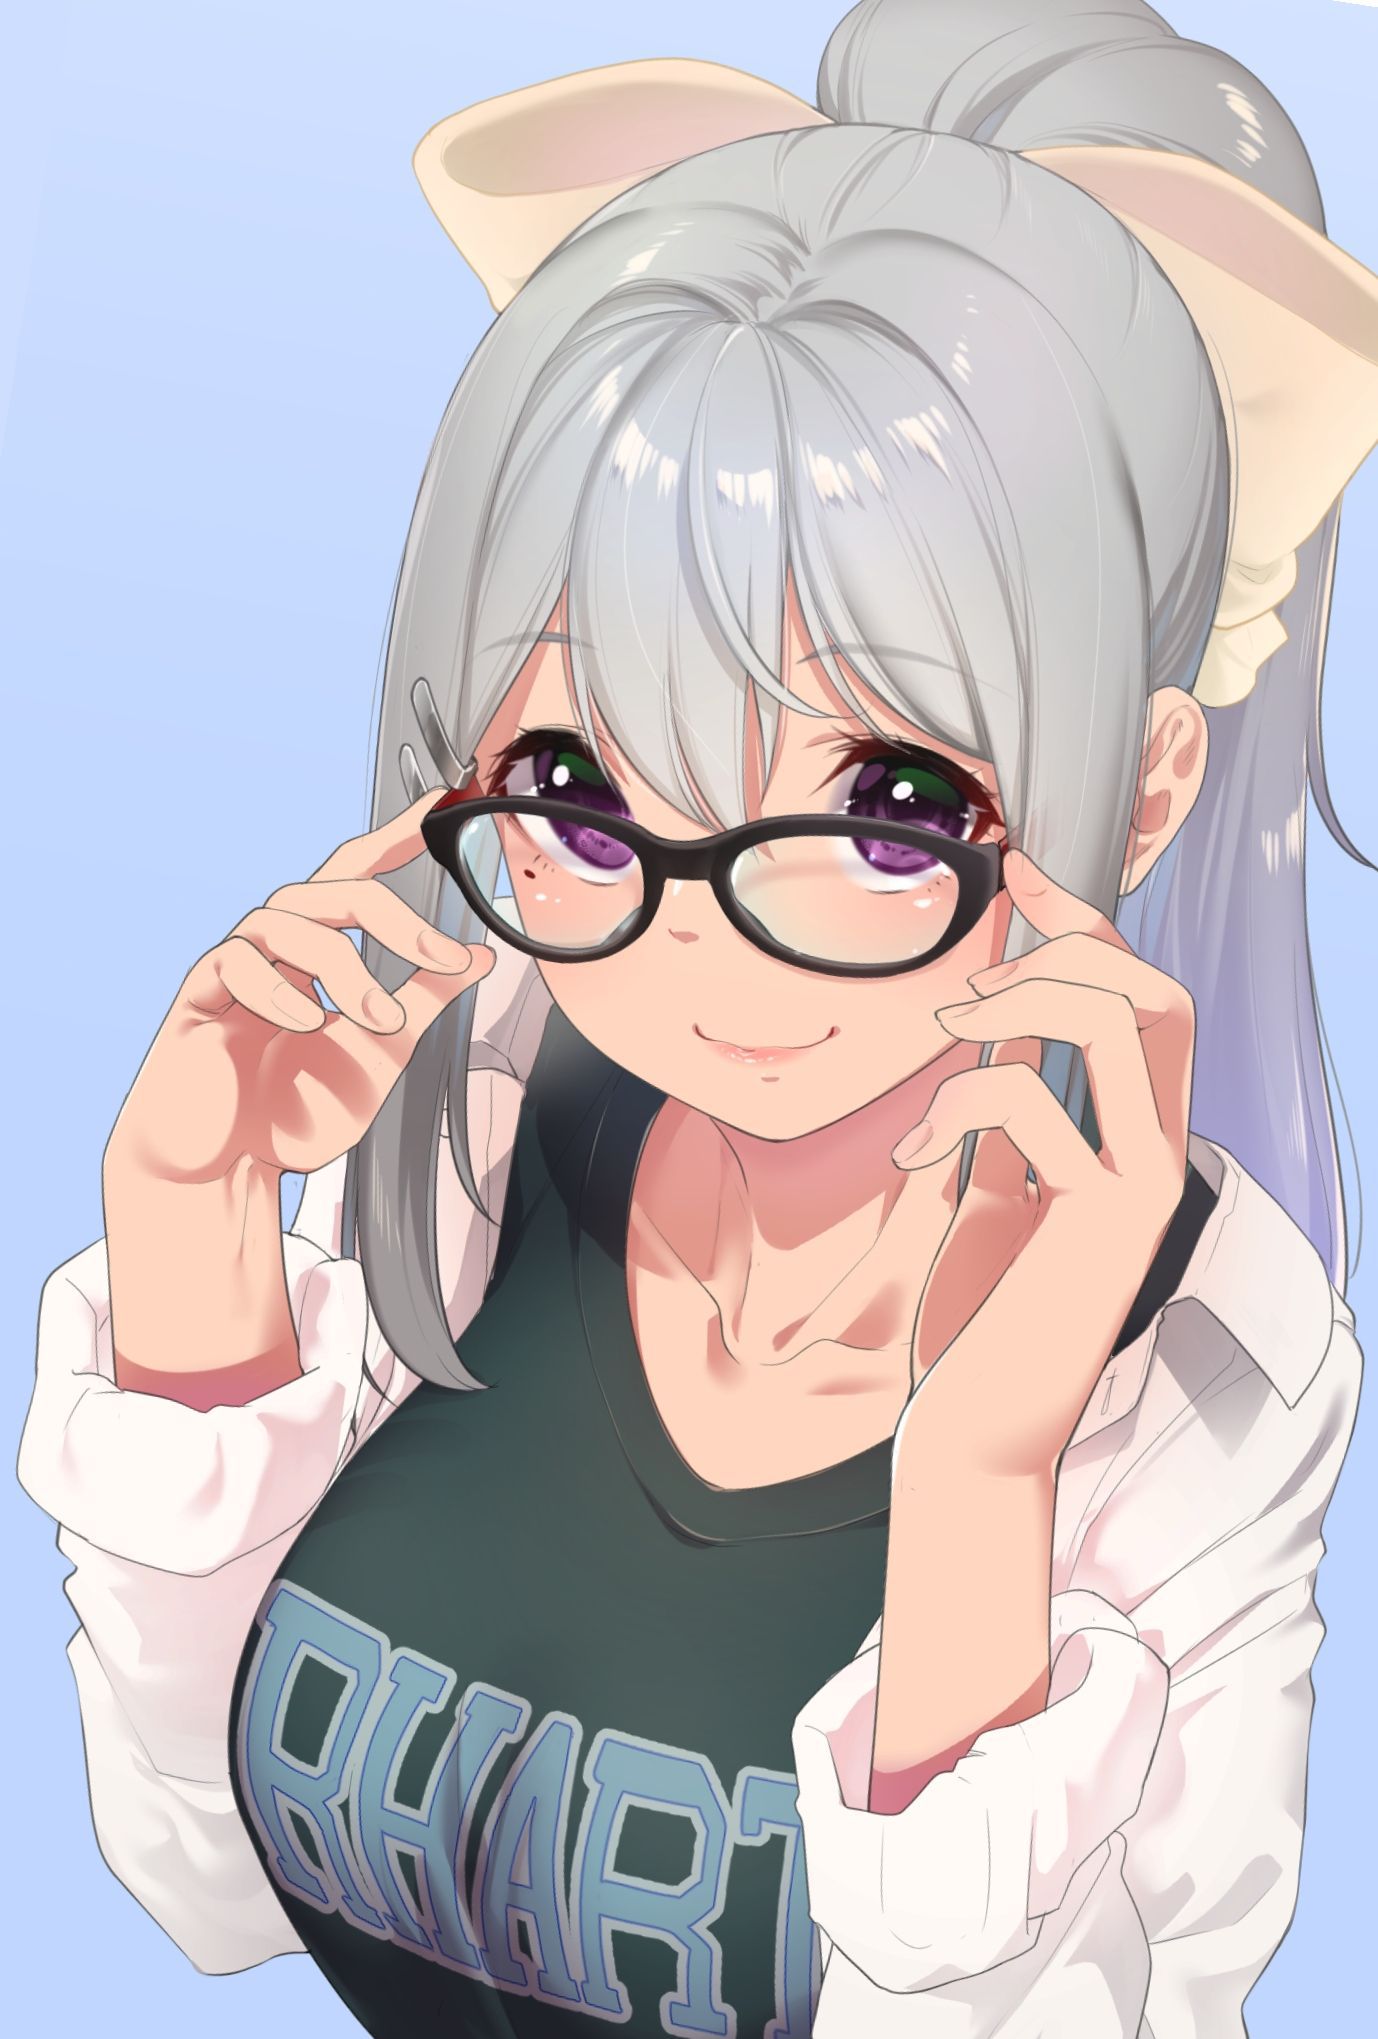 [2nd] Cute Glasses Daughter Secondary Image Part 45 [Glasses Daughter Non-Erotic] 20